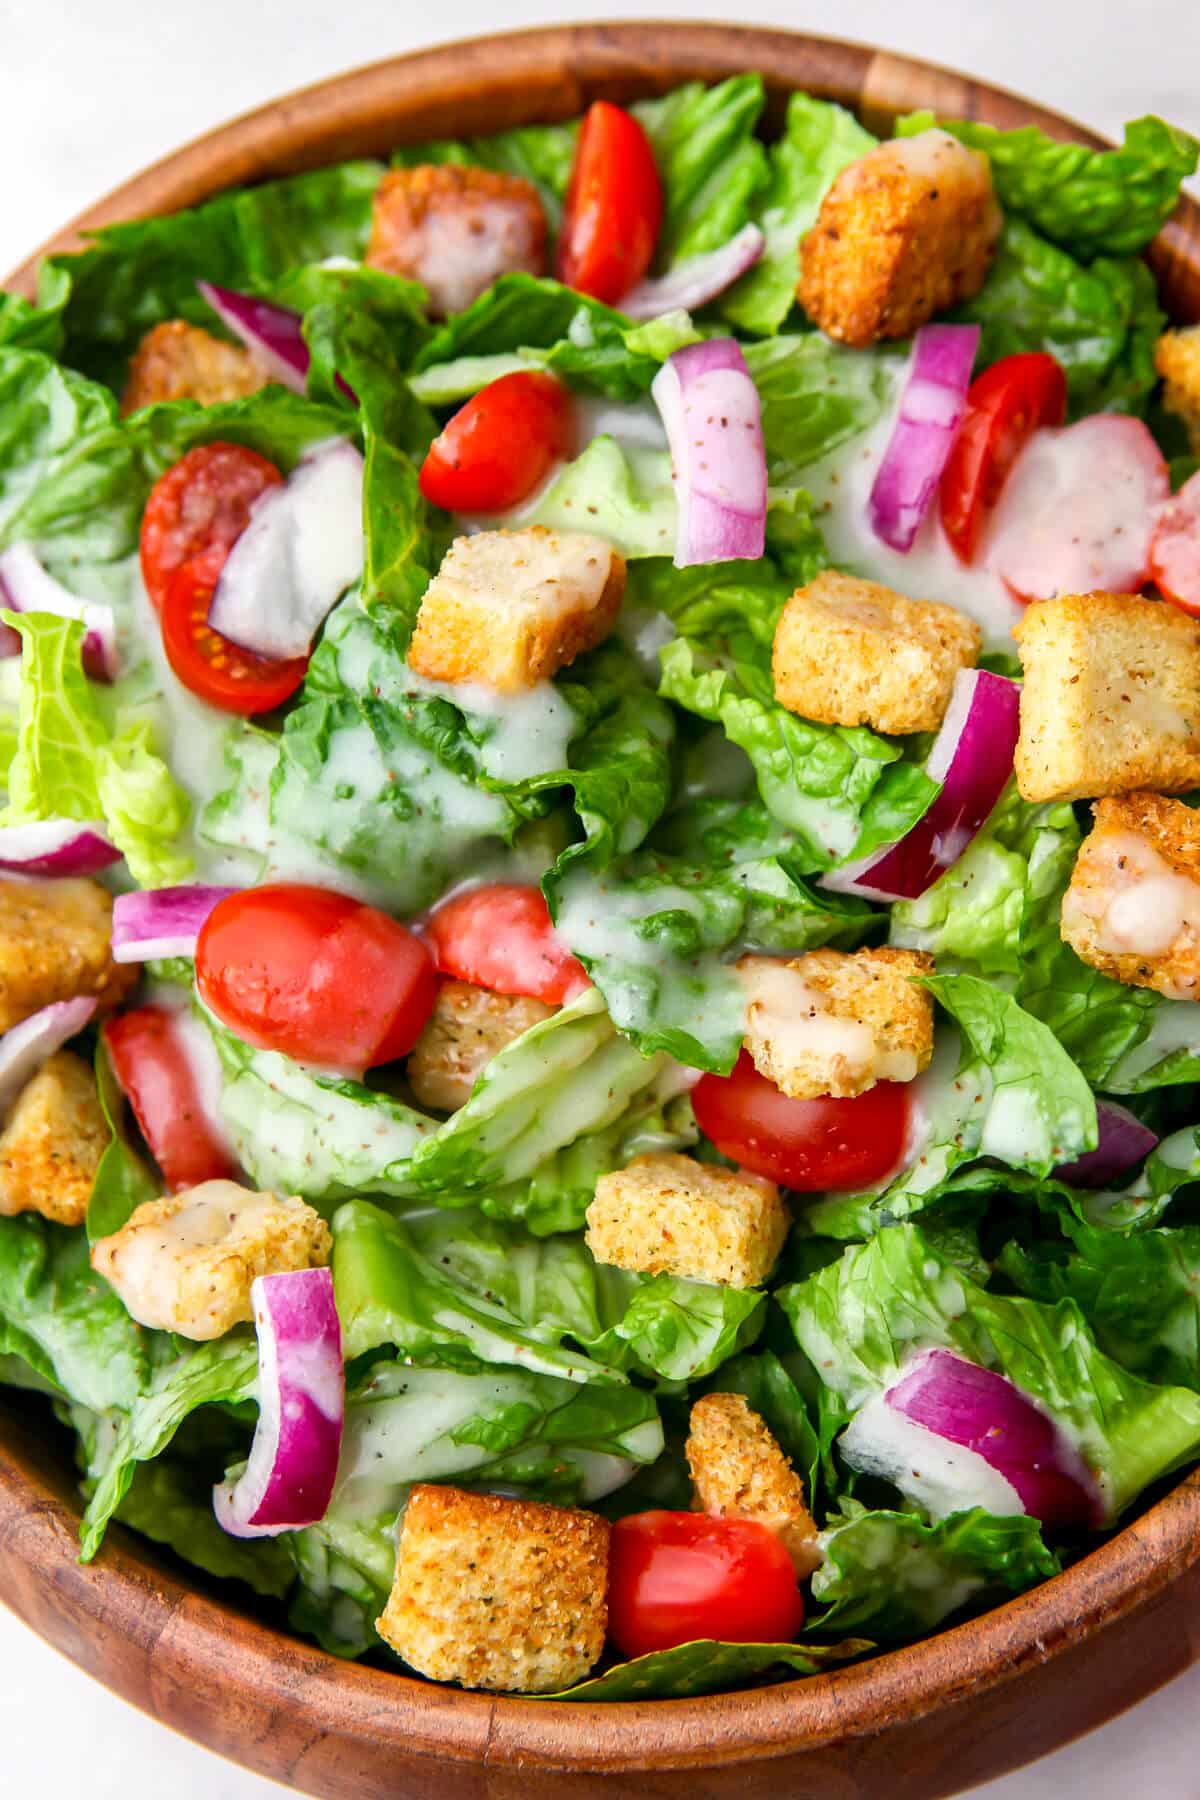 A salad with lettuce, cucumbers, tomatoes, croutons, and sweet onion dressing on top.